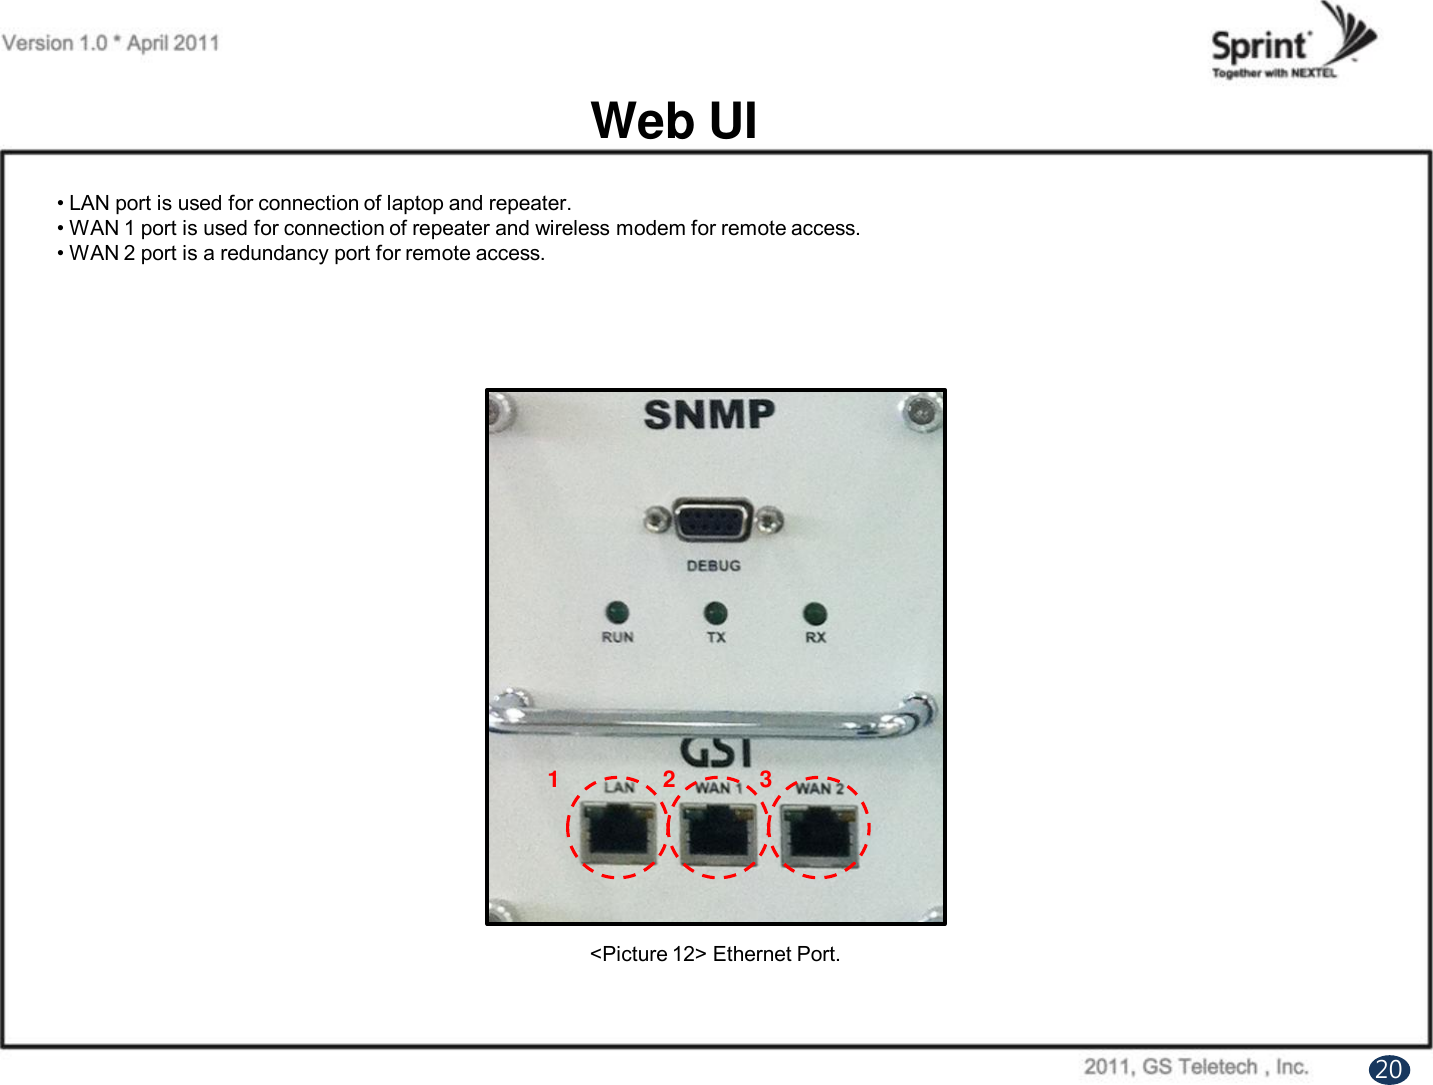 Web UI• LAN port is used for connection of laptop and repeater.• WAN 1 port is used for connection of repeater and wireless modem for remote access.• WAN 2 port is a redundancy port for remote access.&lt;Picture 12&gt; Ethernet Port.1  2 320